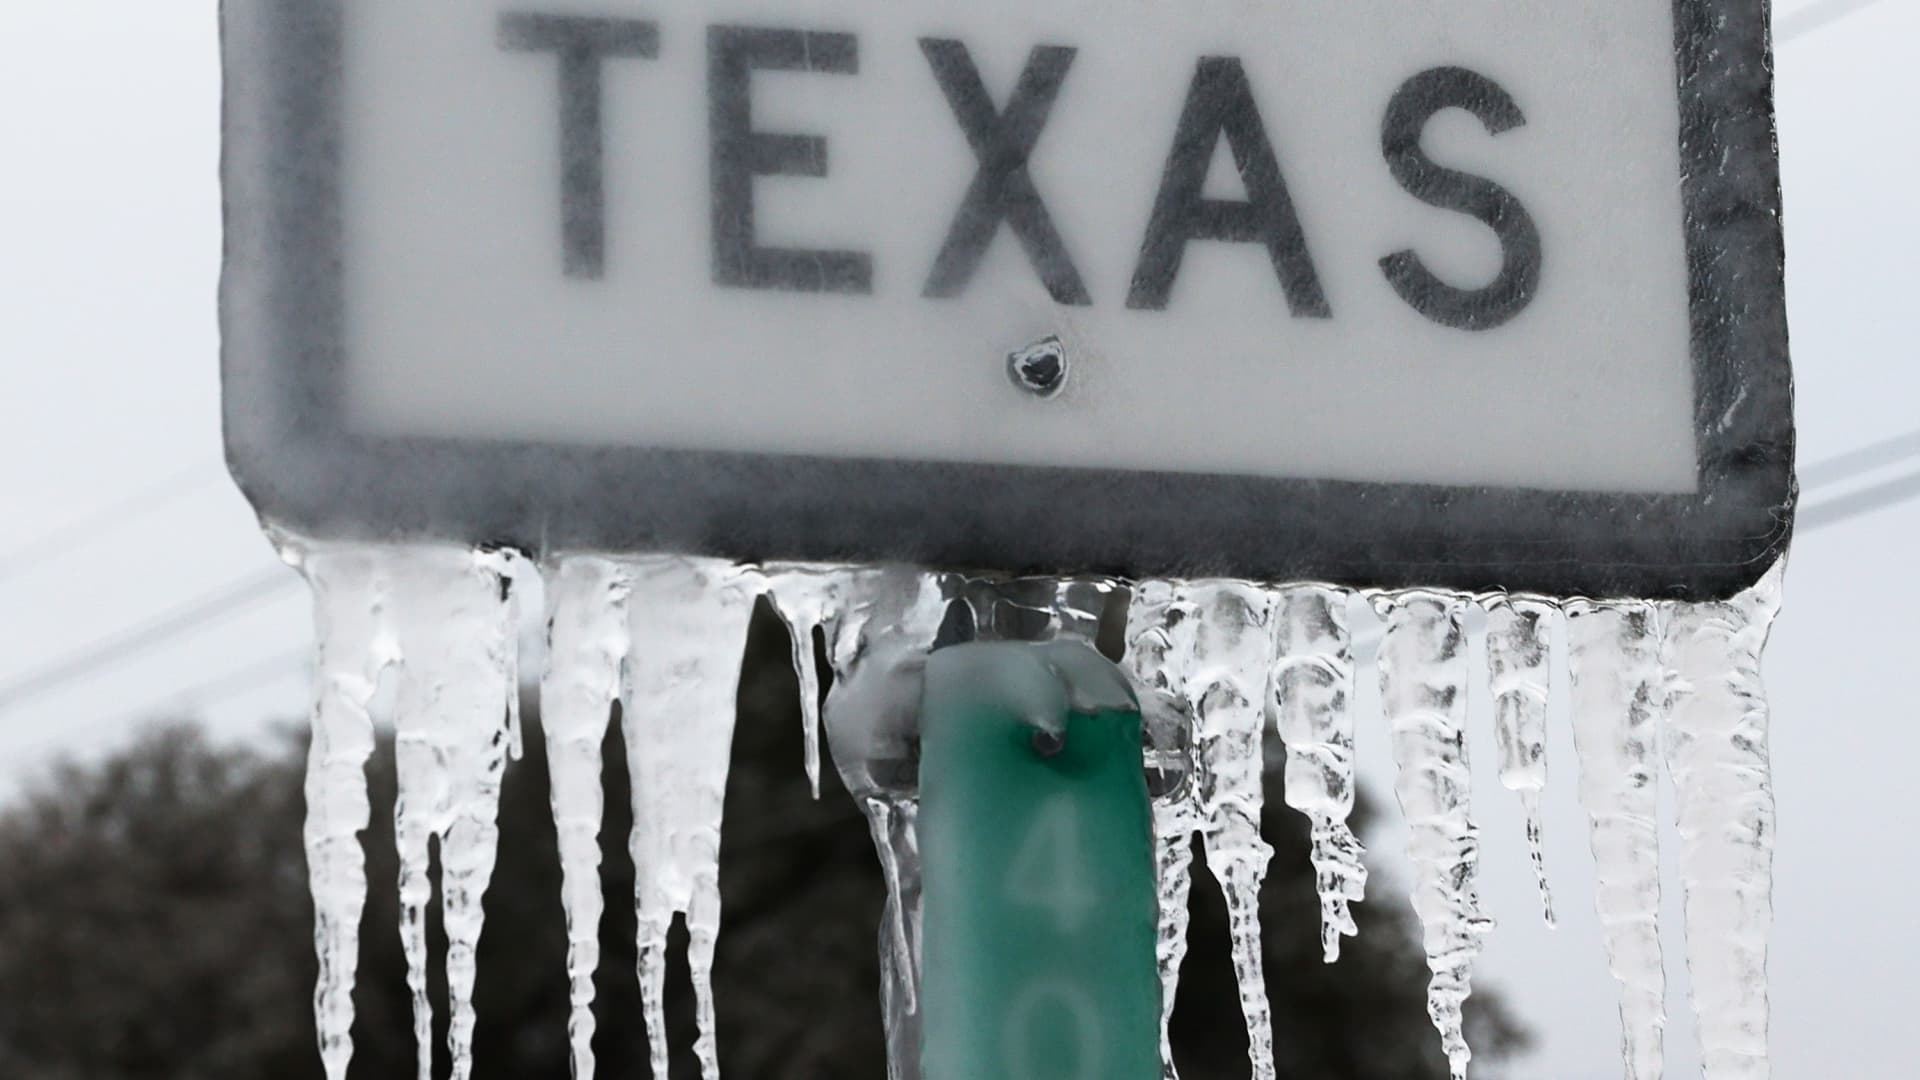 Icicles hang off the State Highway 195 sign on Feb. 18, 2021 in Killeen, Texas.